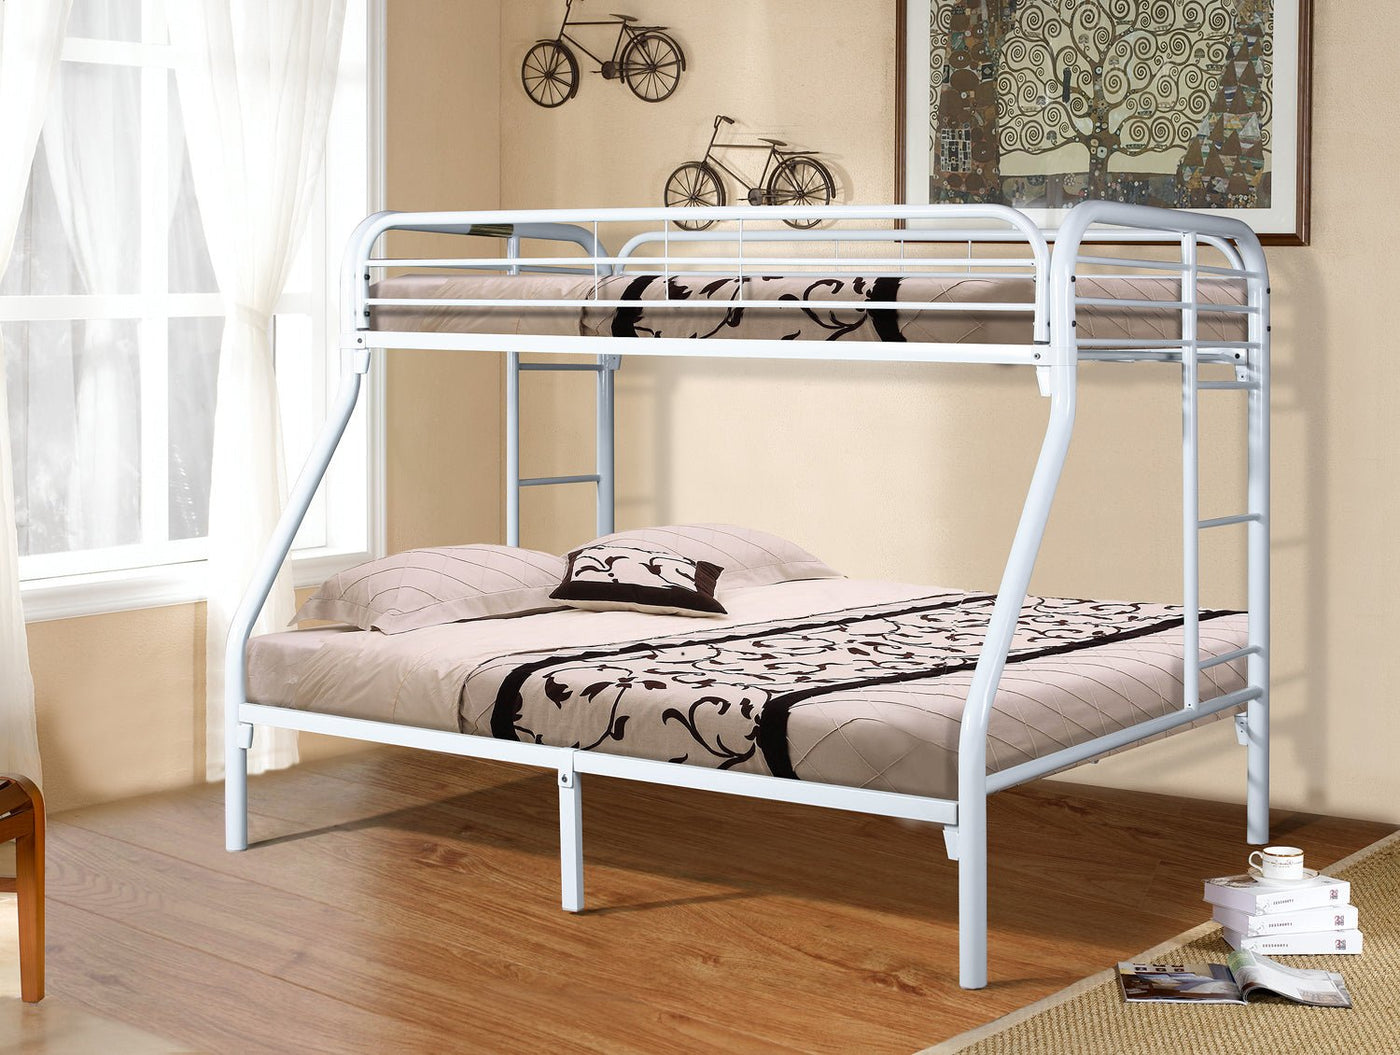 Glossy Steel Twin/Full Bunk Bed